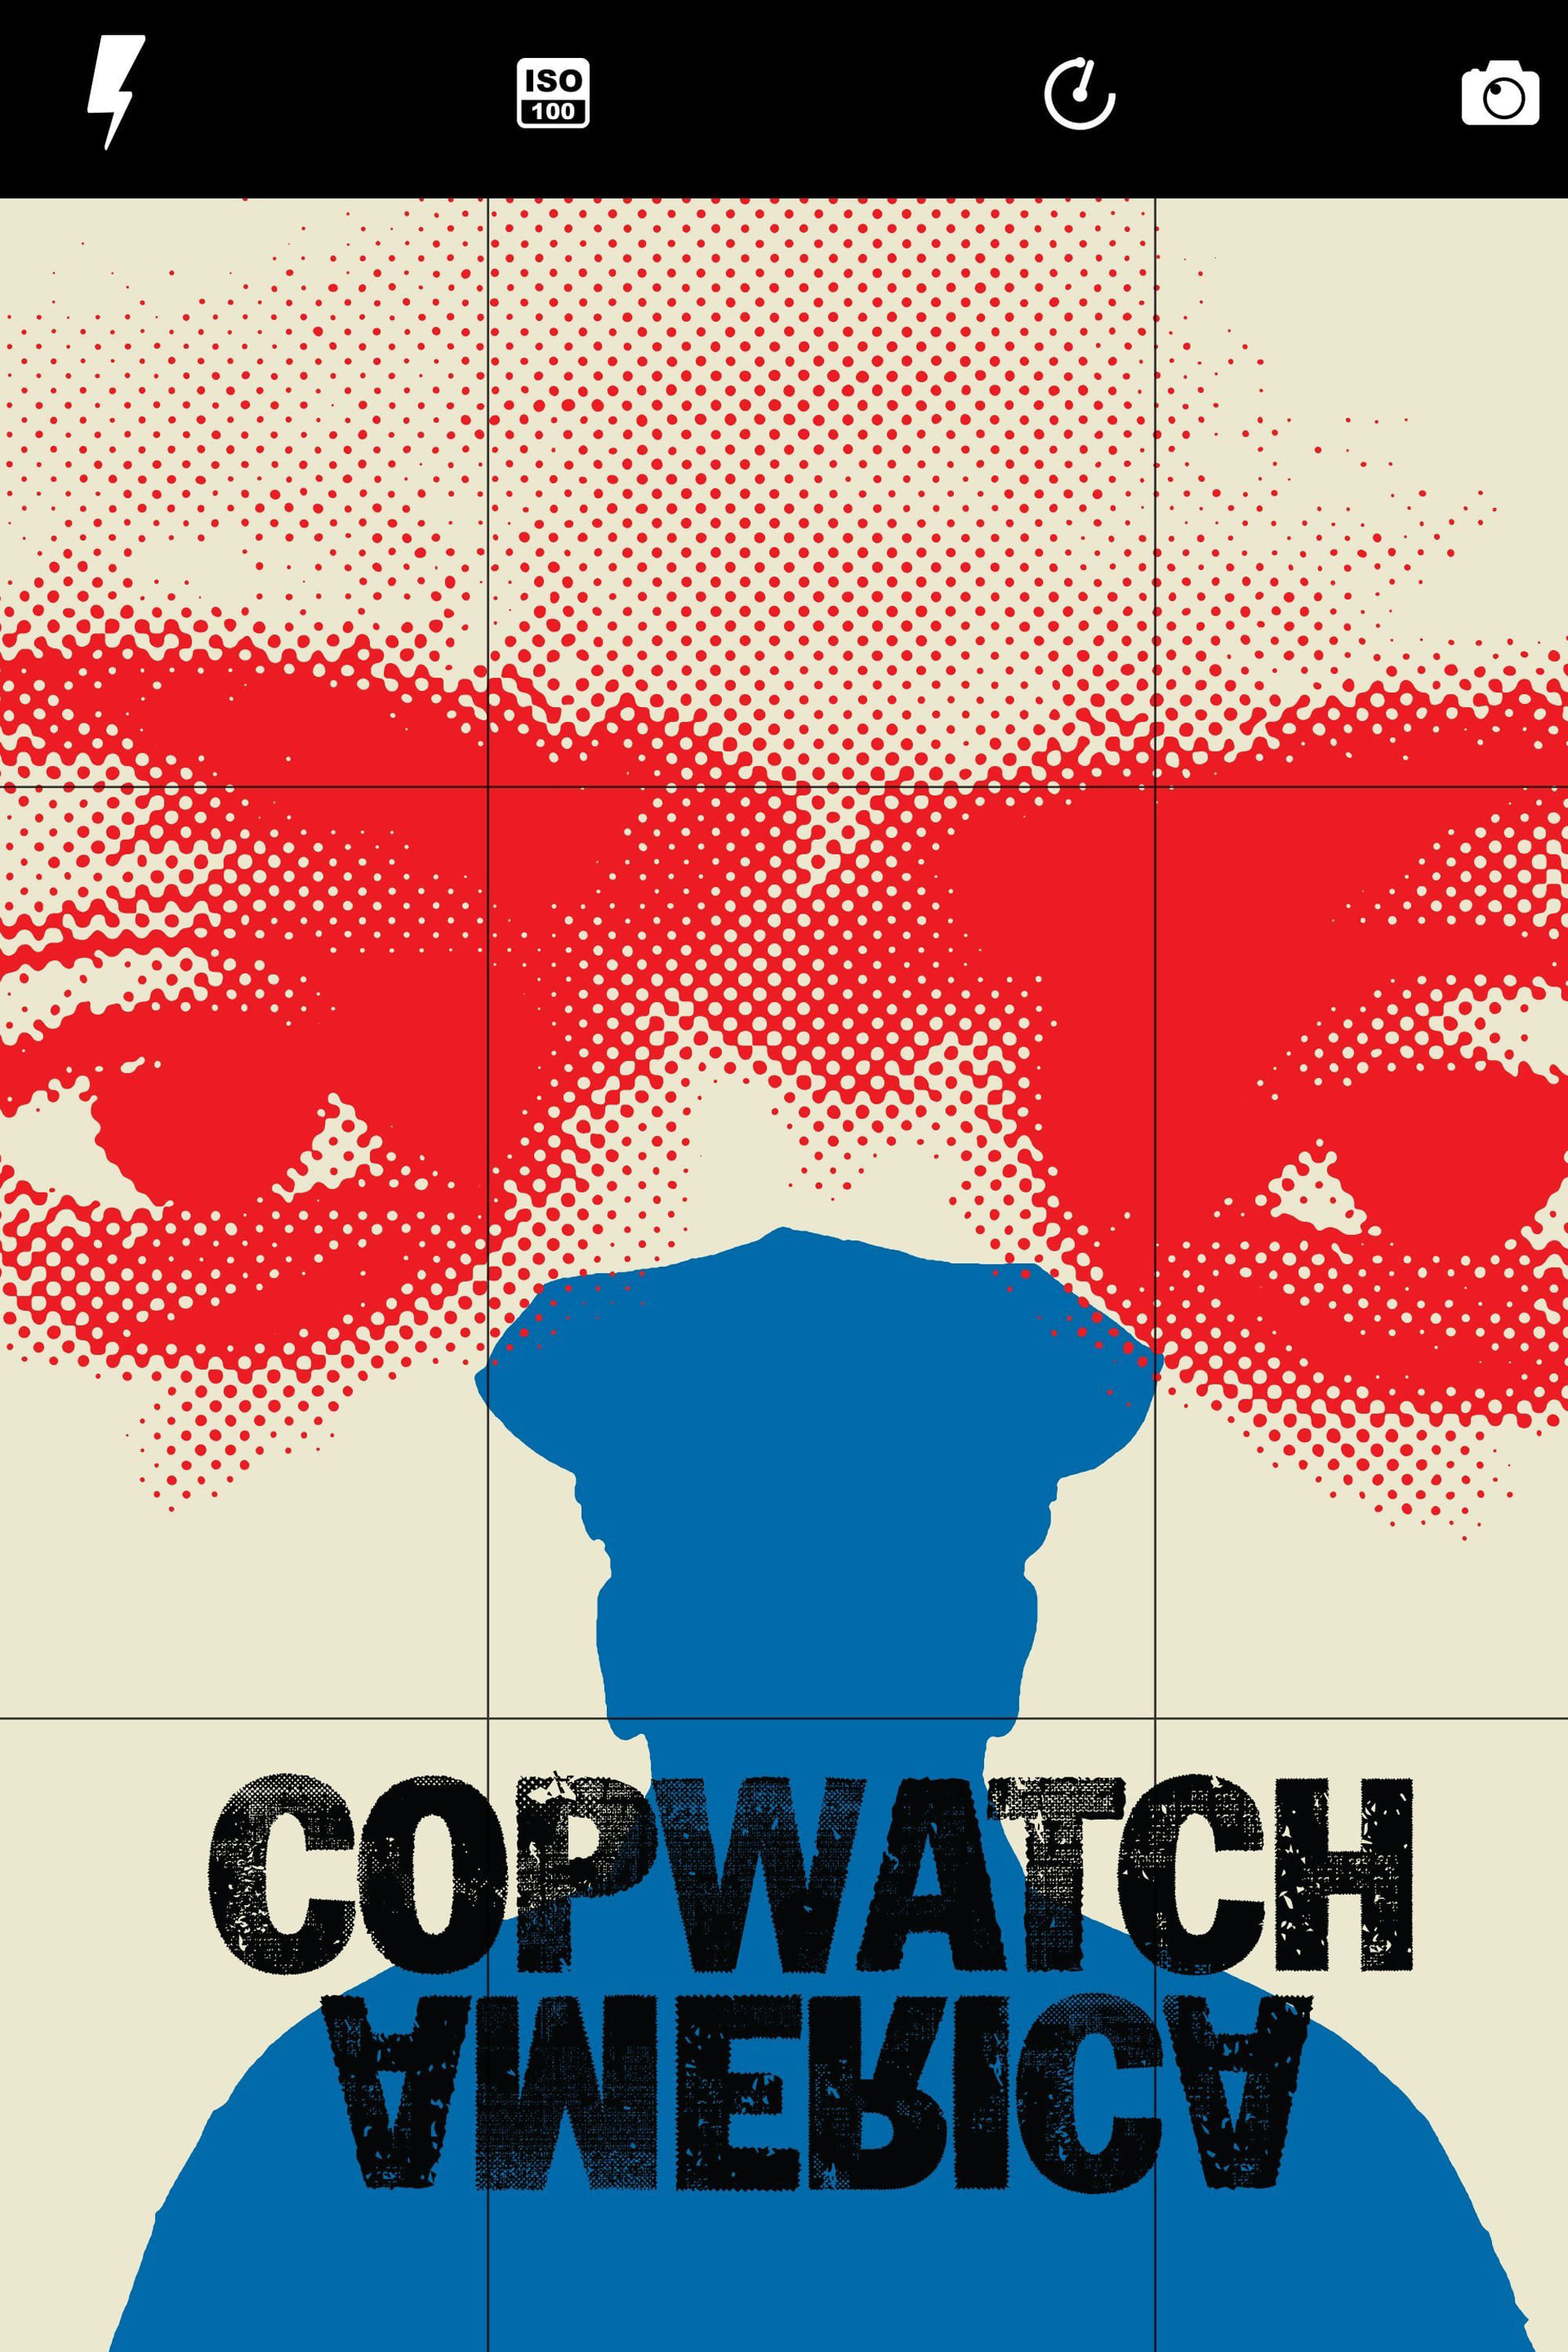 Copwatch America TV Shows About Police Brutality